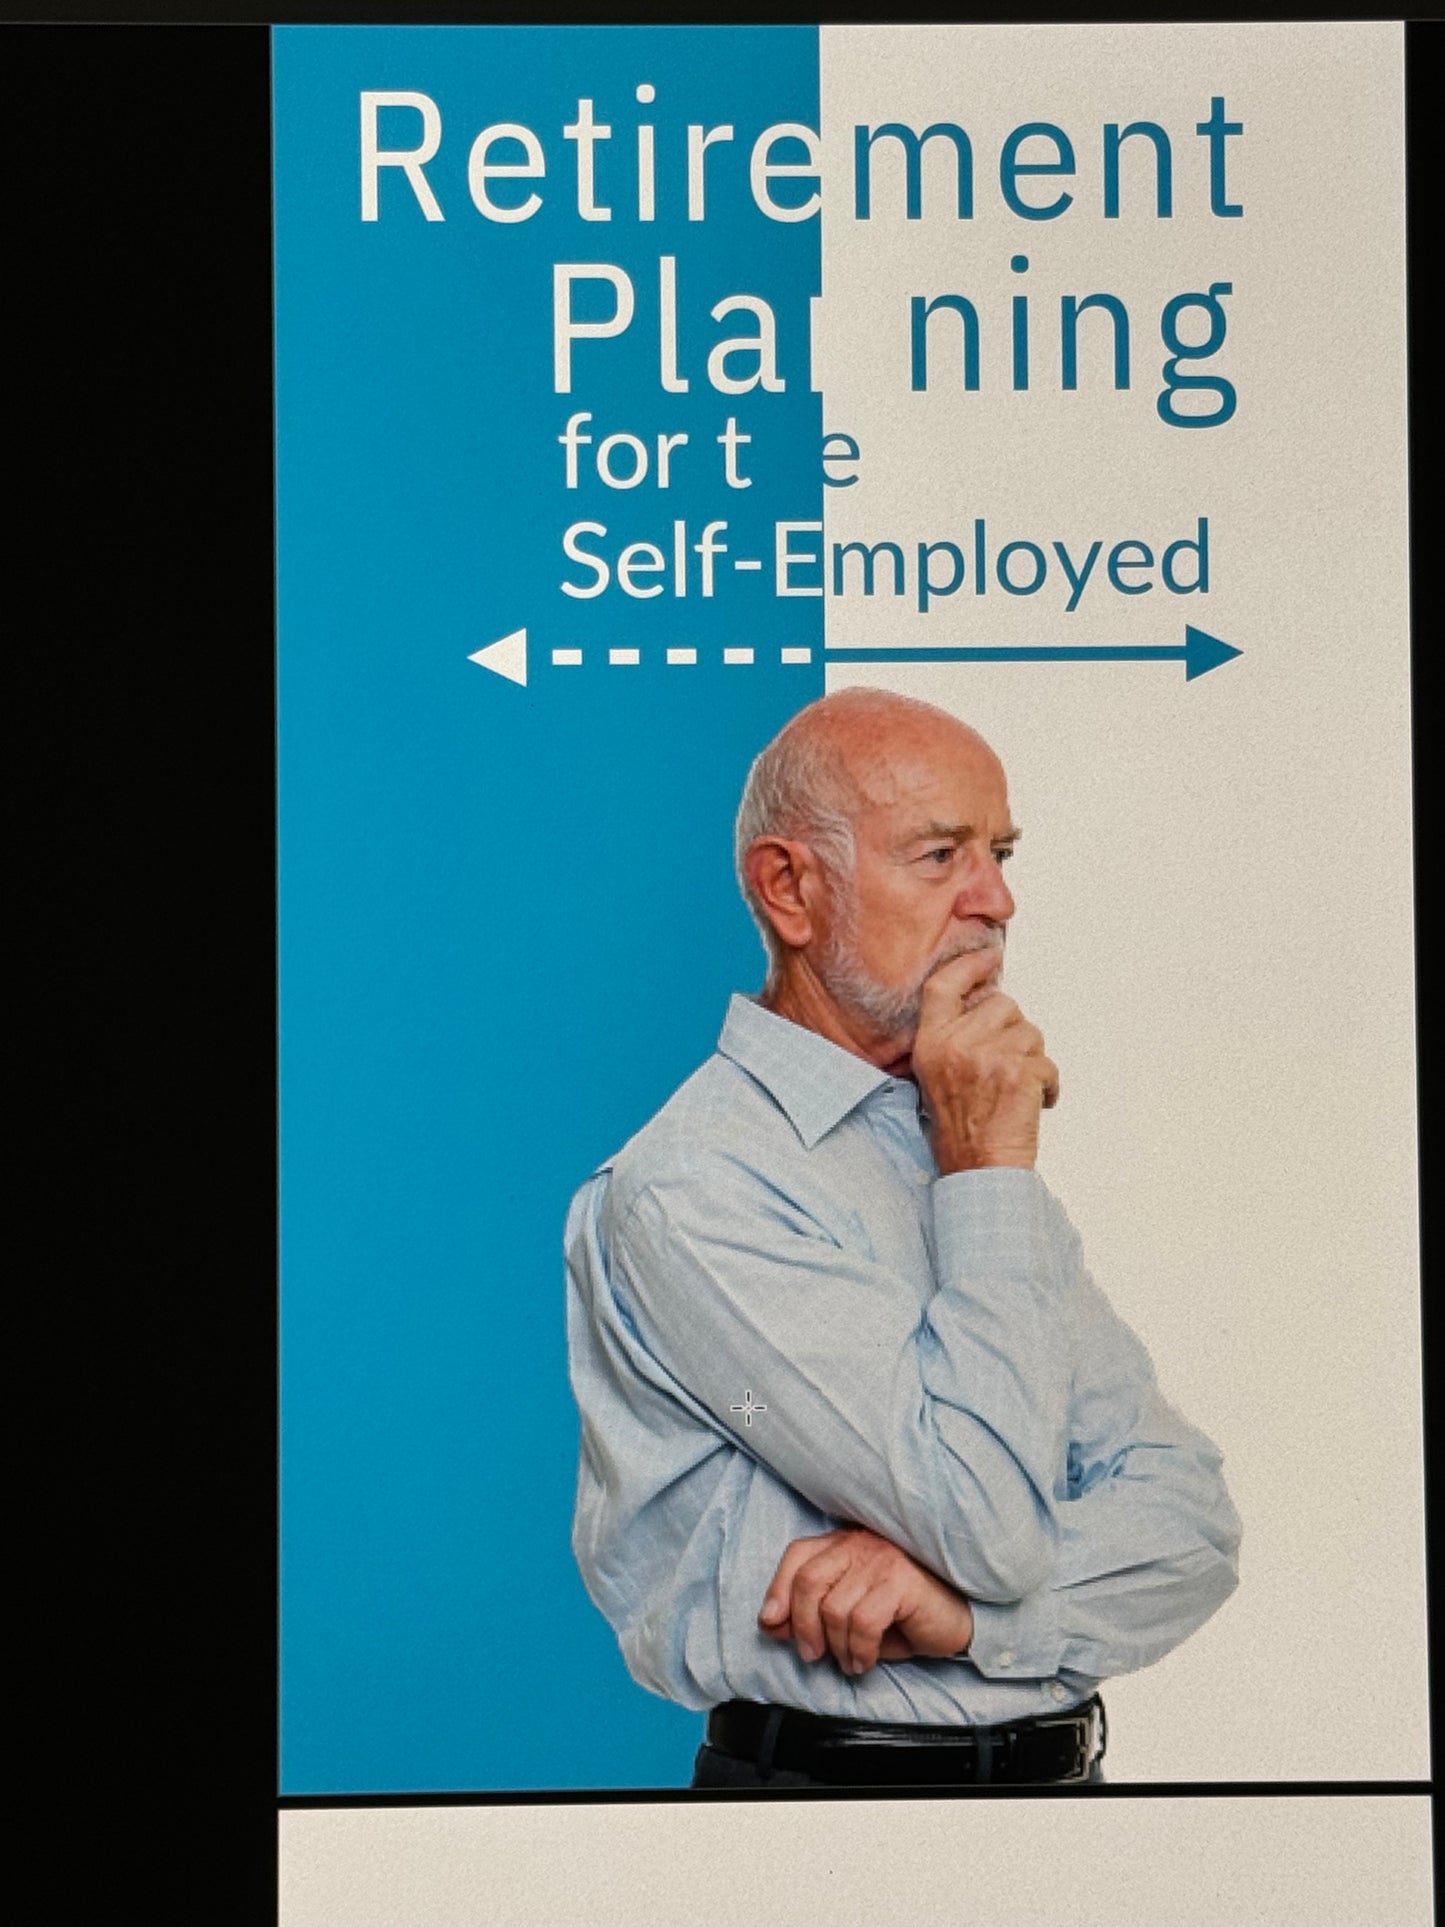 Retirement Planning For The Self-Employed